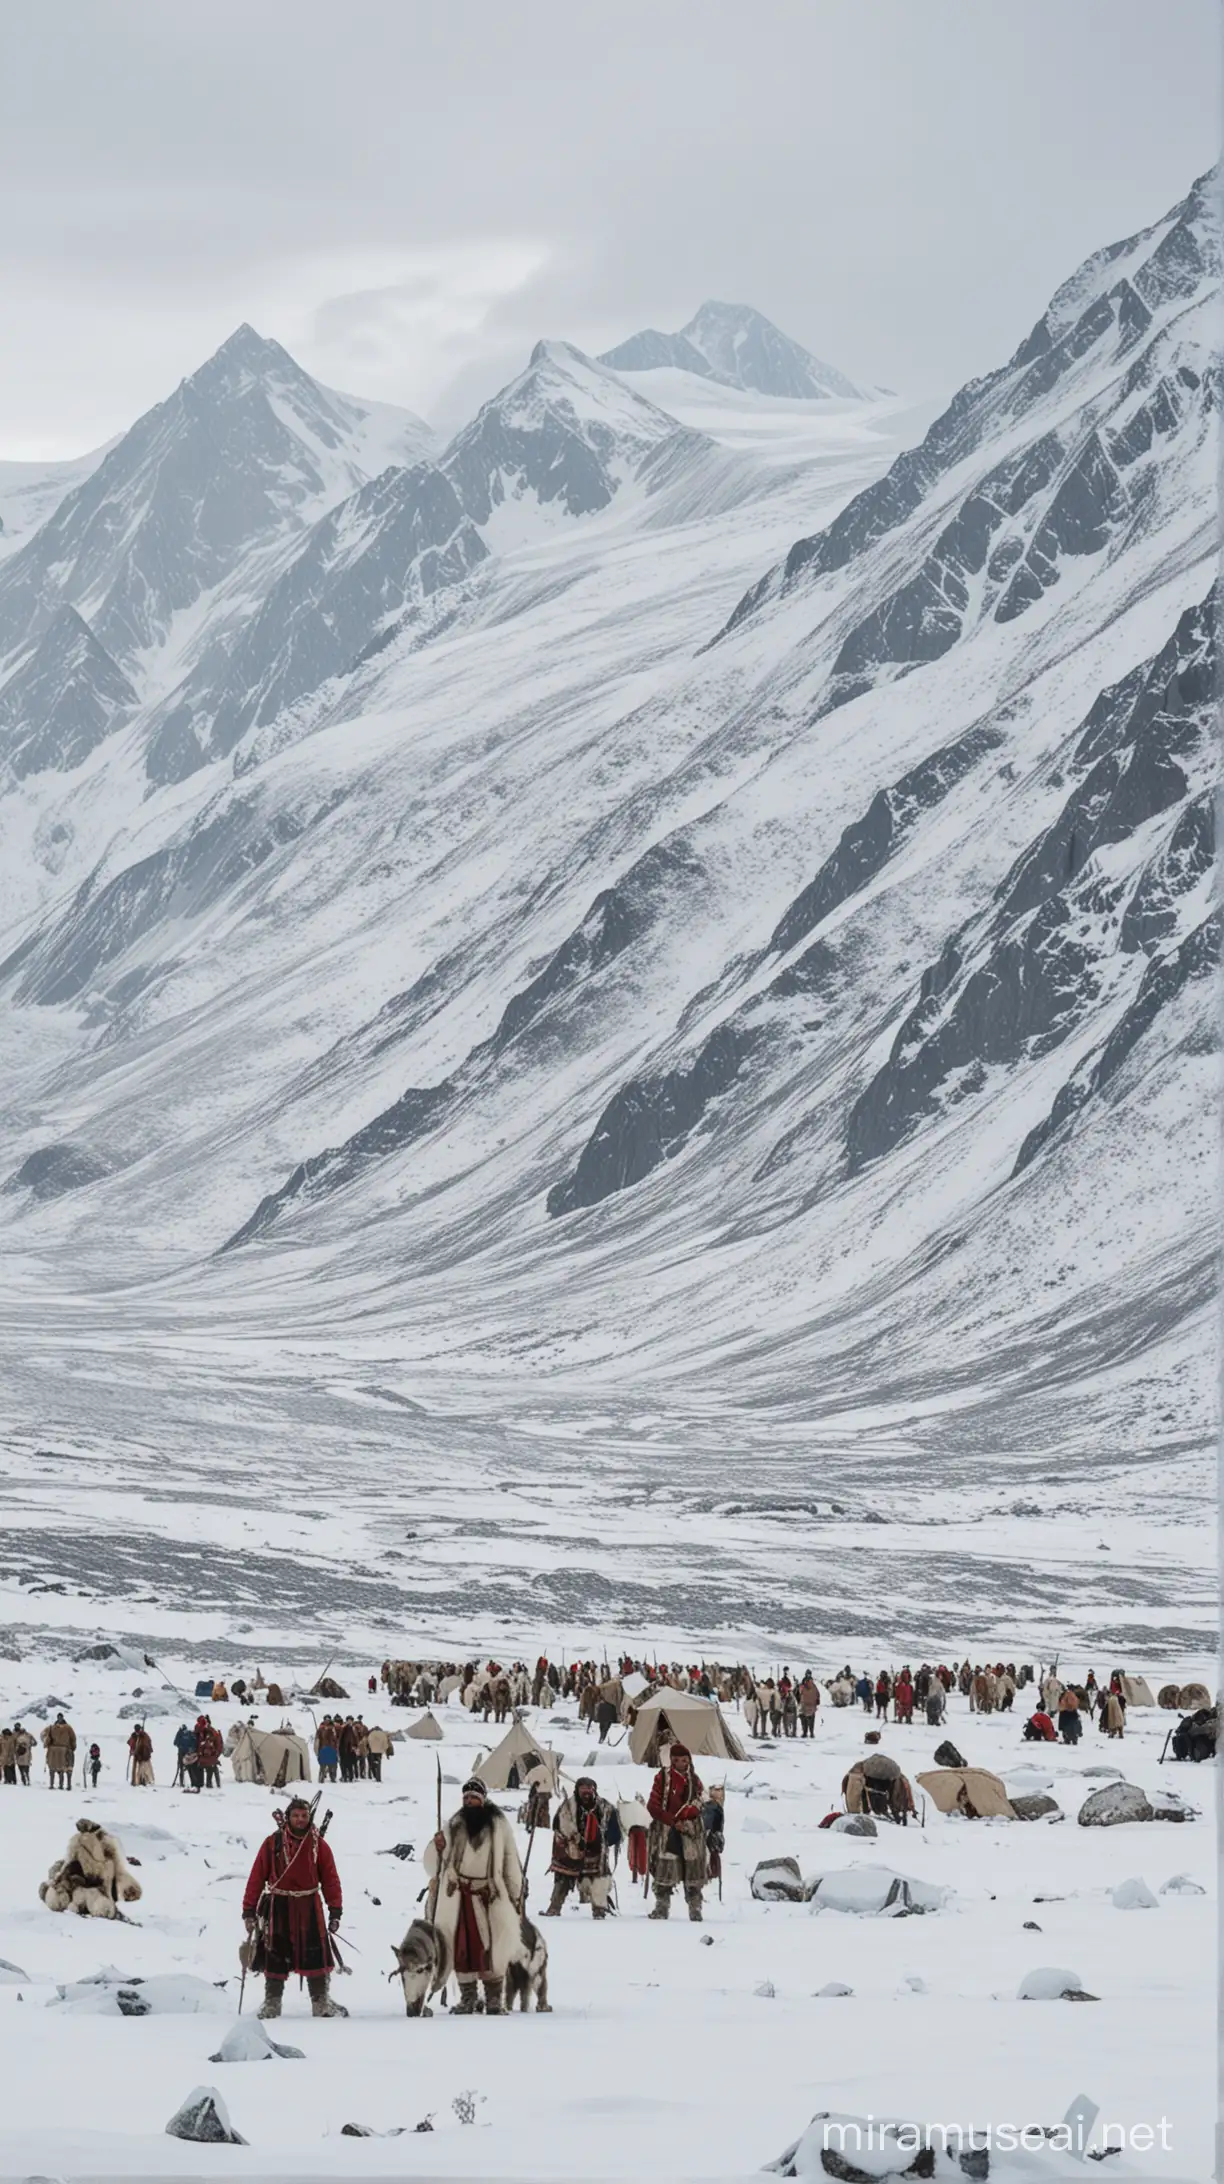 Chukchi Peninsula Tribe Preparing for Traditional Hunting amidst Snowcovered Mountains